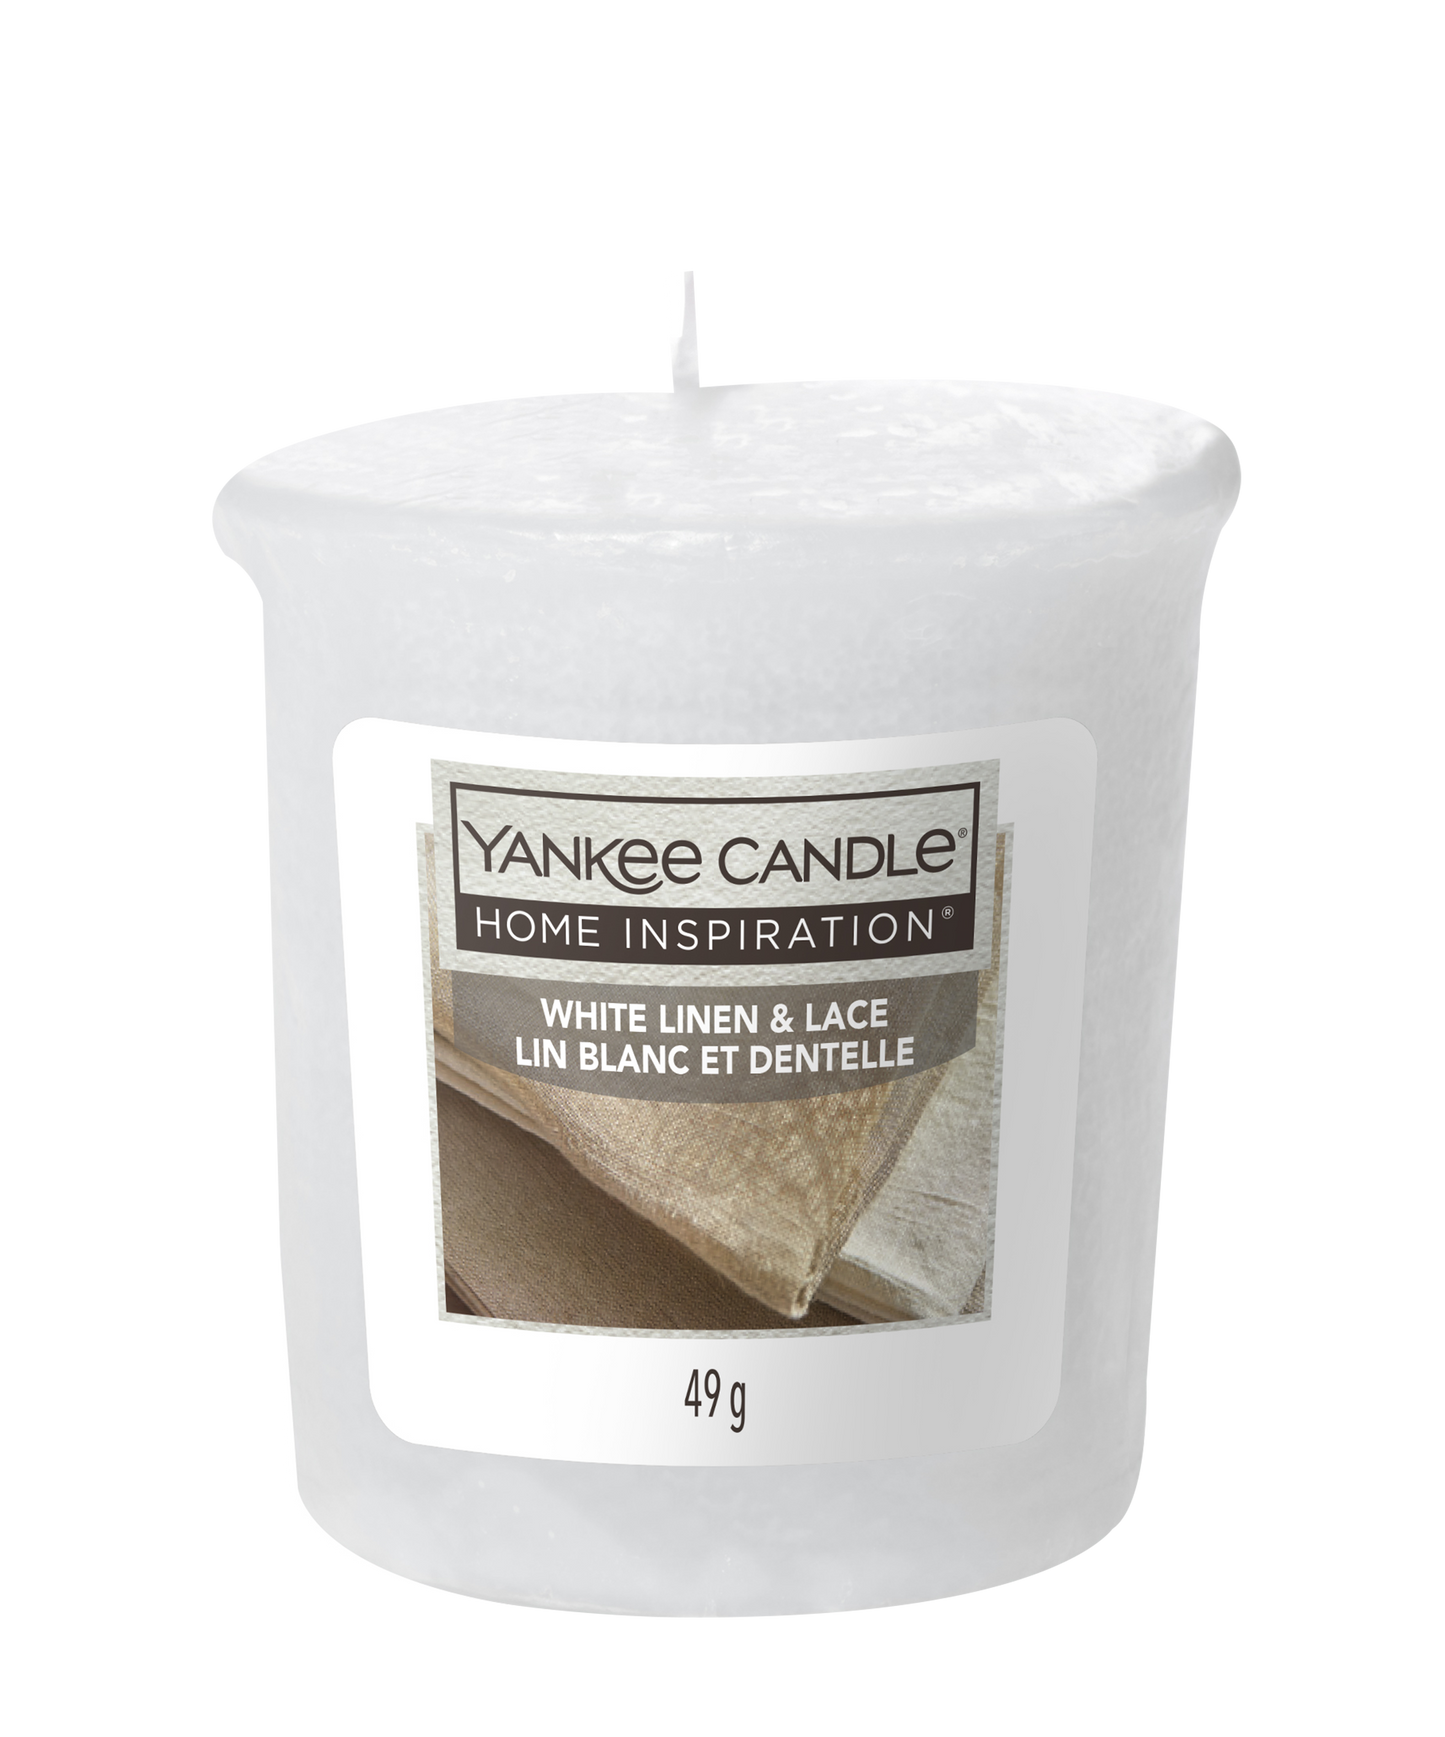 White Linen & Lace Votive This elegant fragrance by Yankee Candle® Home Inspiration® features top notes of ozonic breeze, apple blossom, and raspberry leaf.